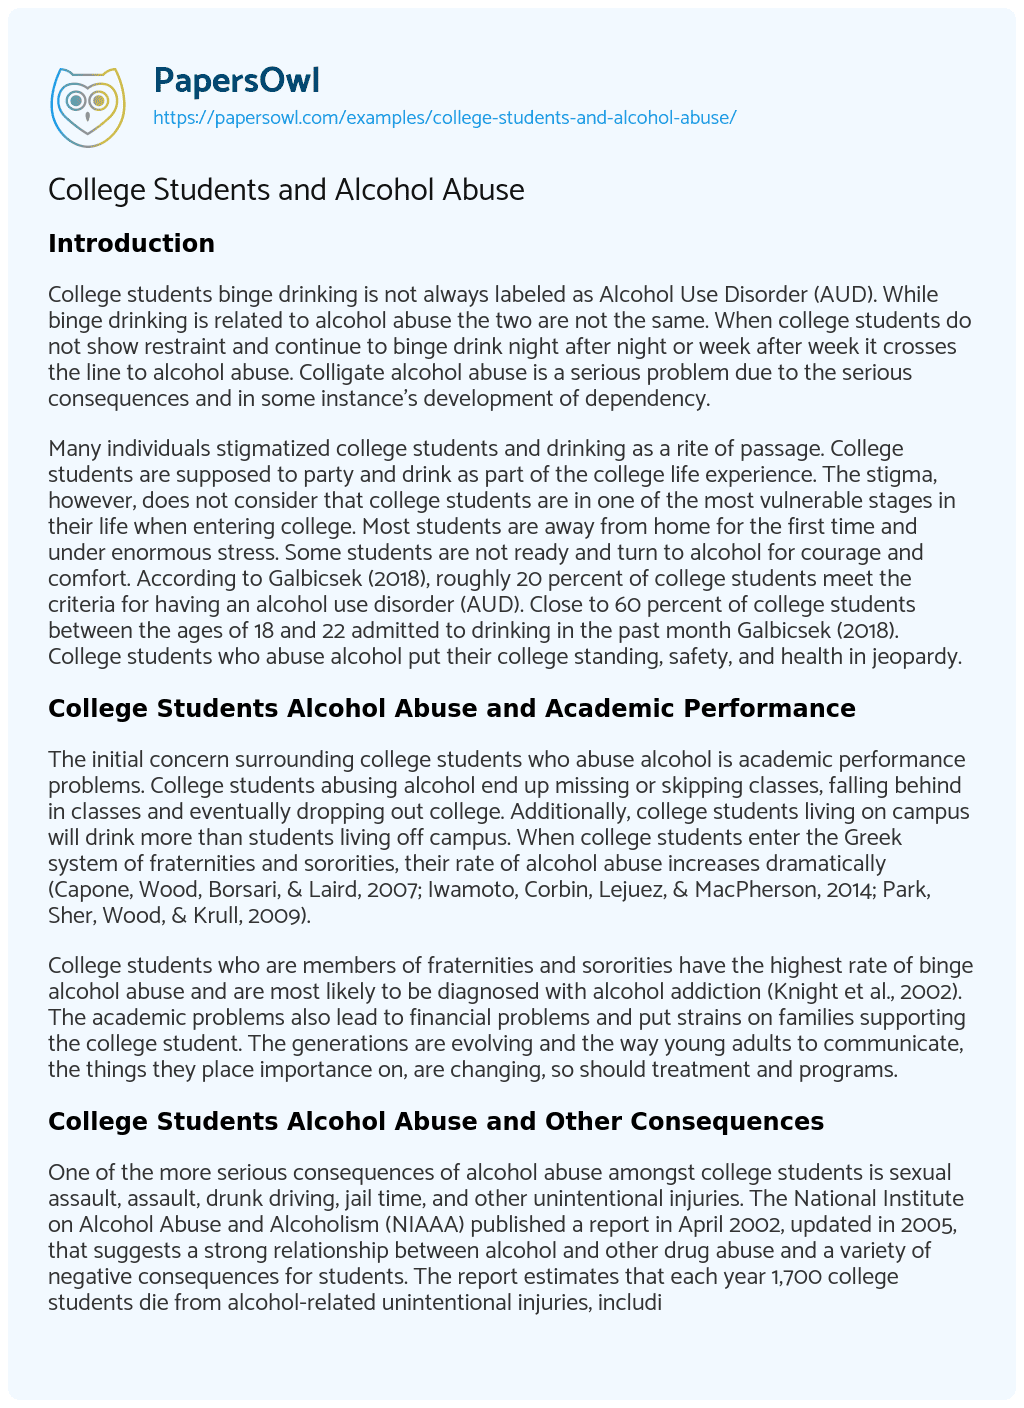 College Students and Alcohol Abuse essay